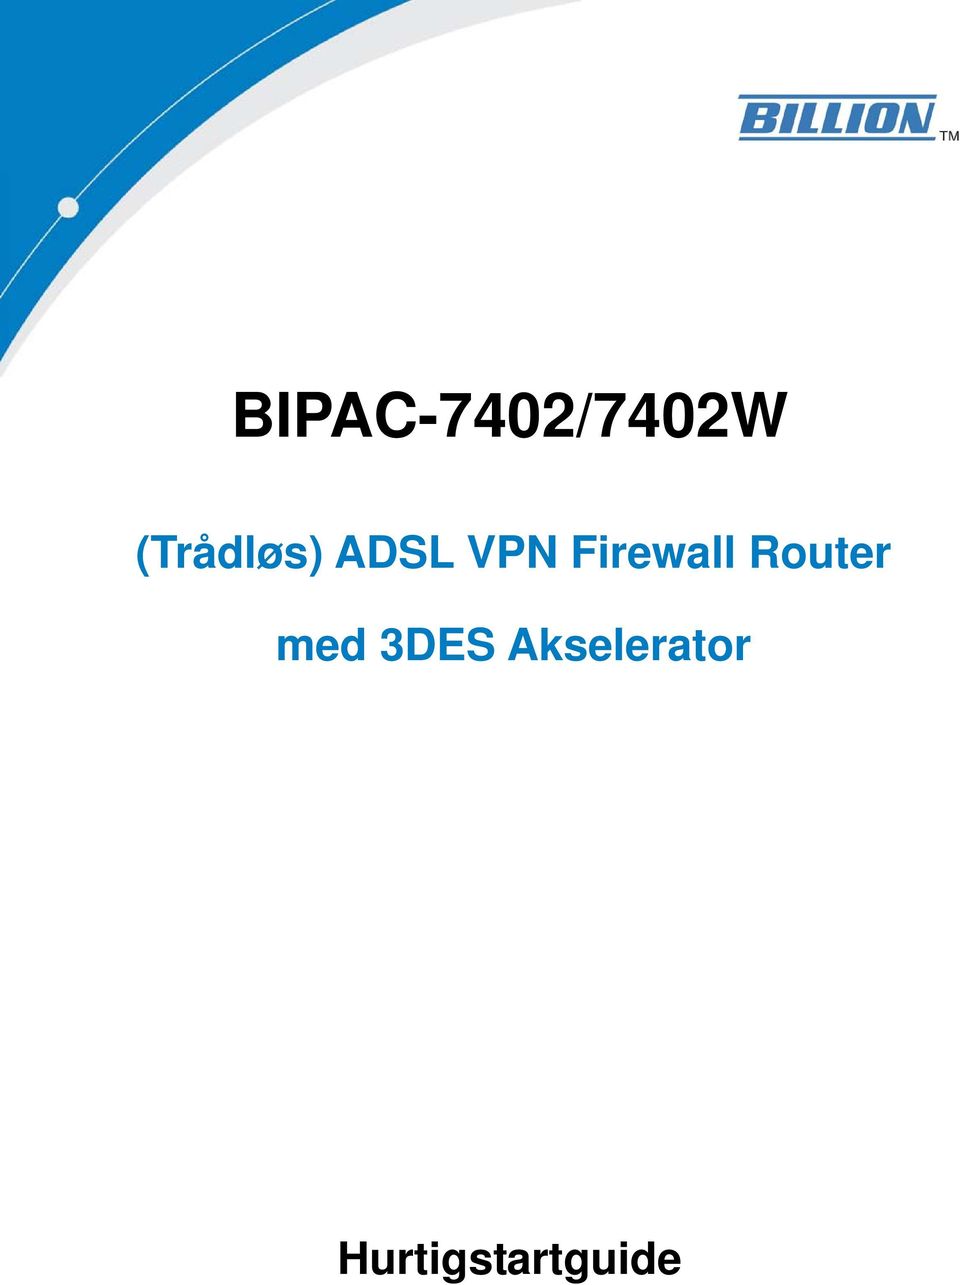 Firewall Router med